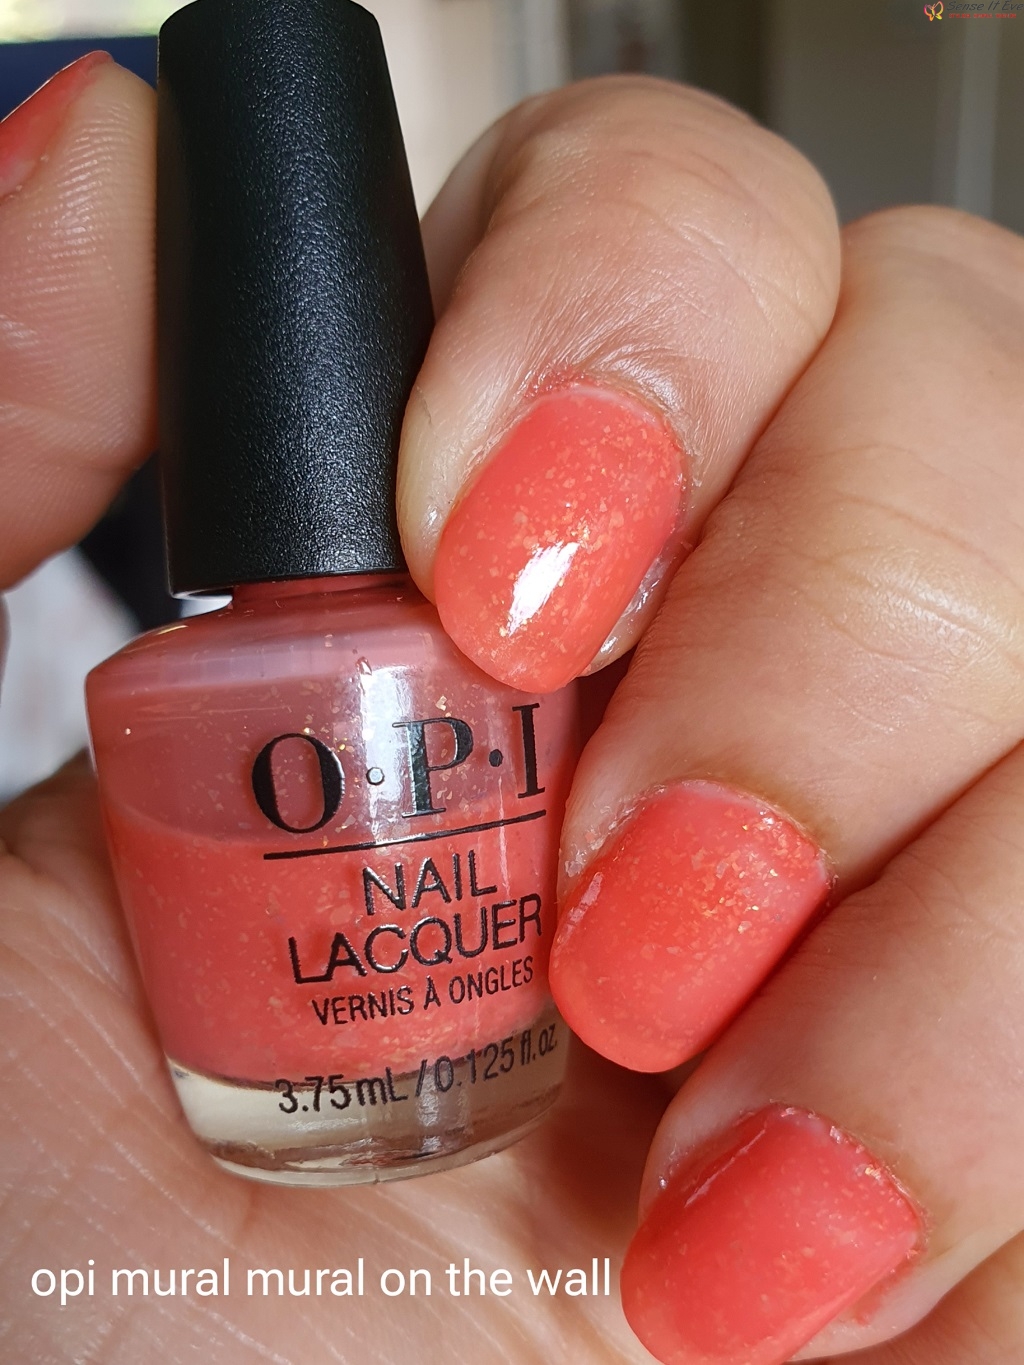 OPI Mural Mural On the Wall Swatches Sense It Eve OPI Mexico City Collection Mini Set Review